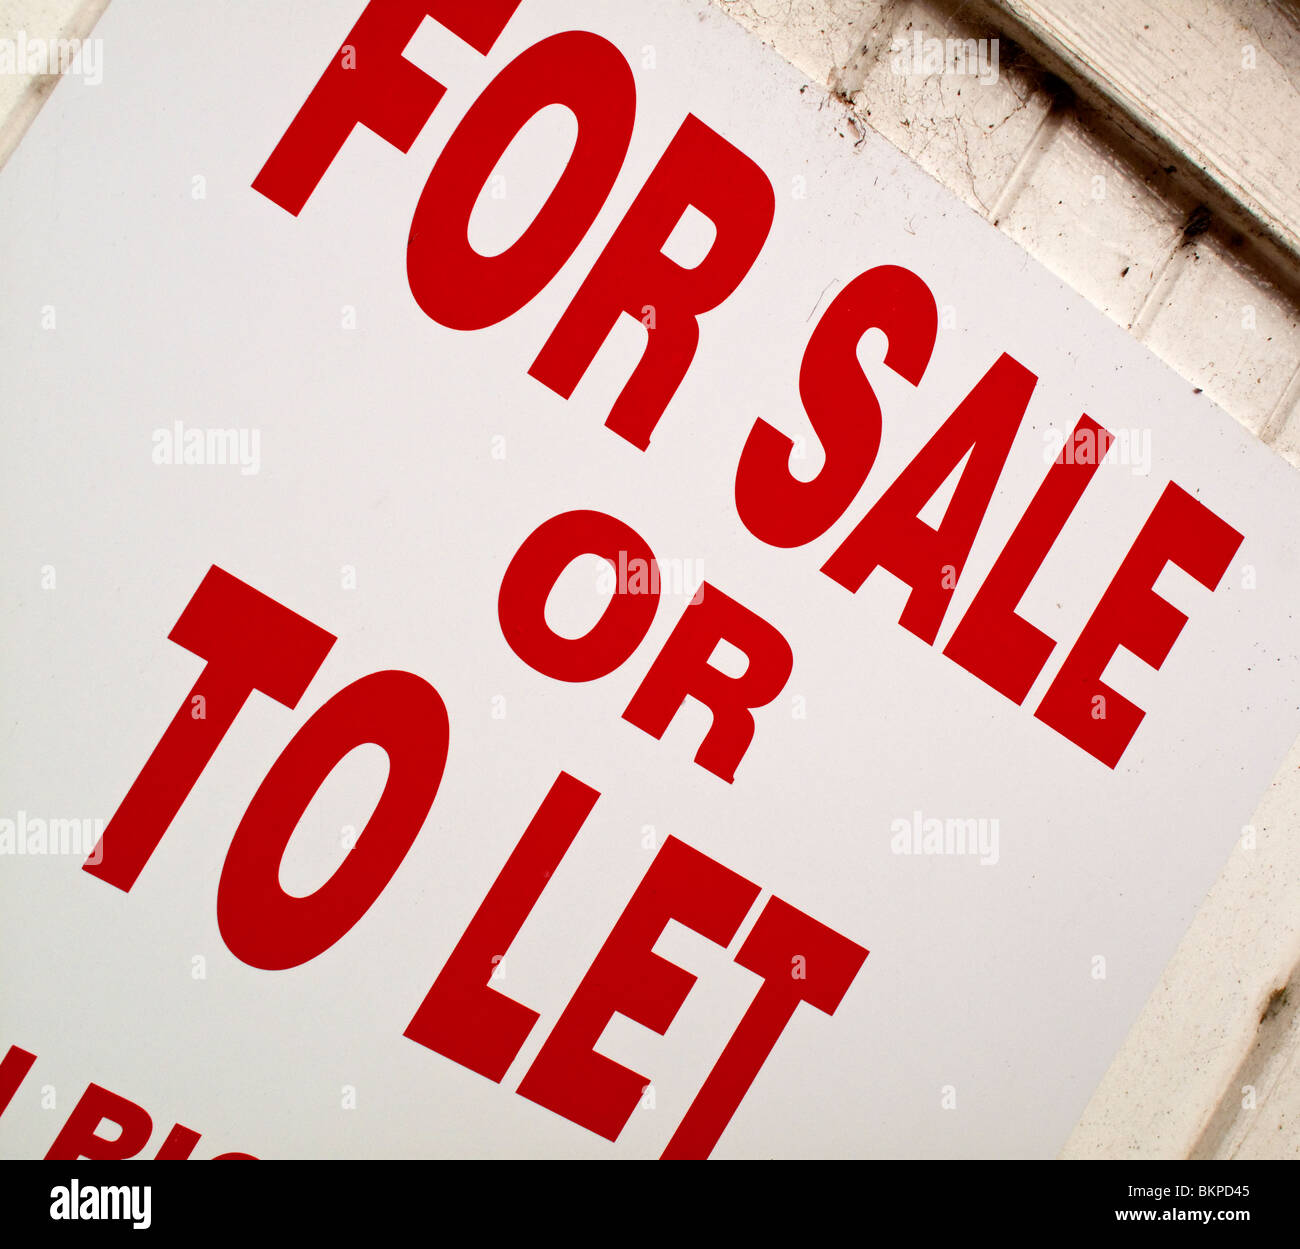 For Sale or To Let sign with red letters against a white background outside an empty commercial property Stock Photo